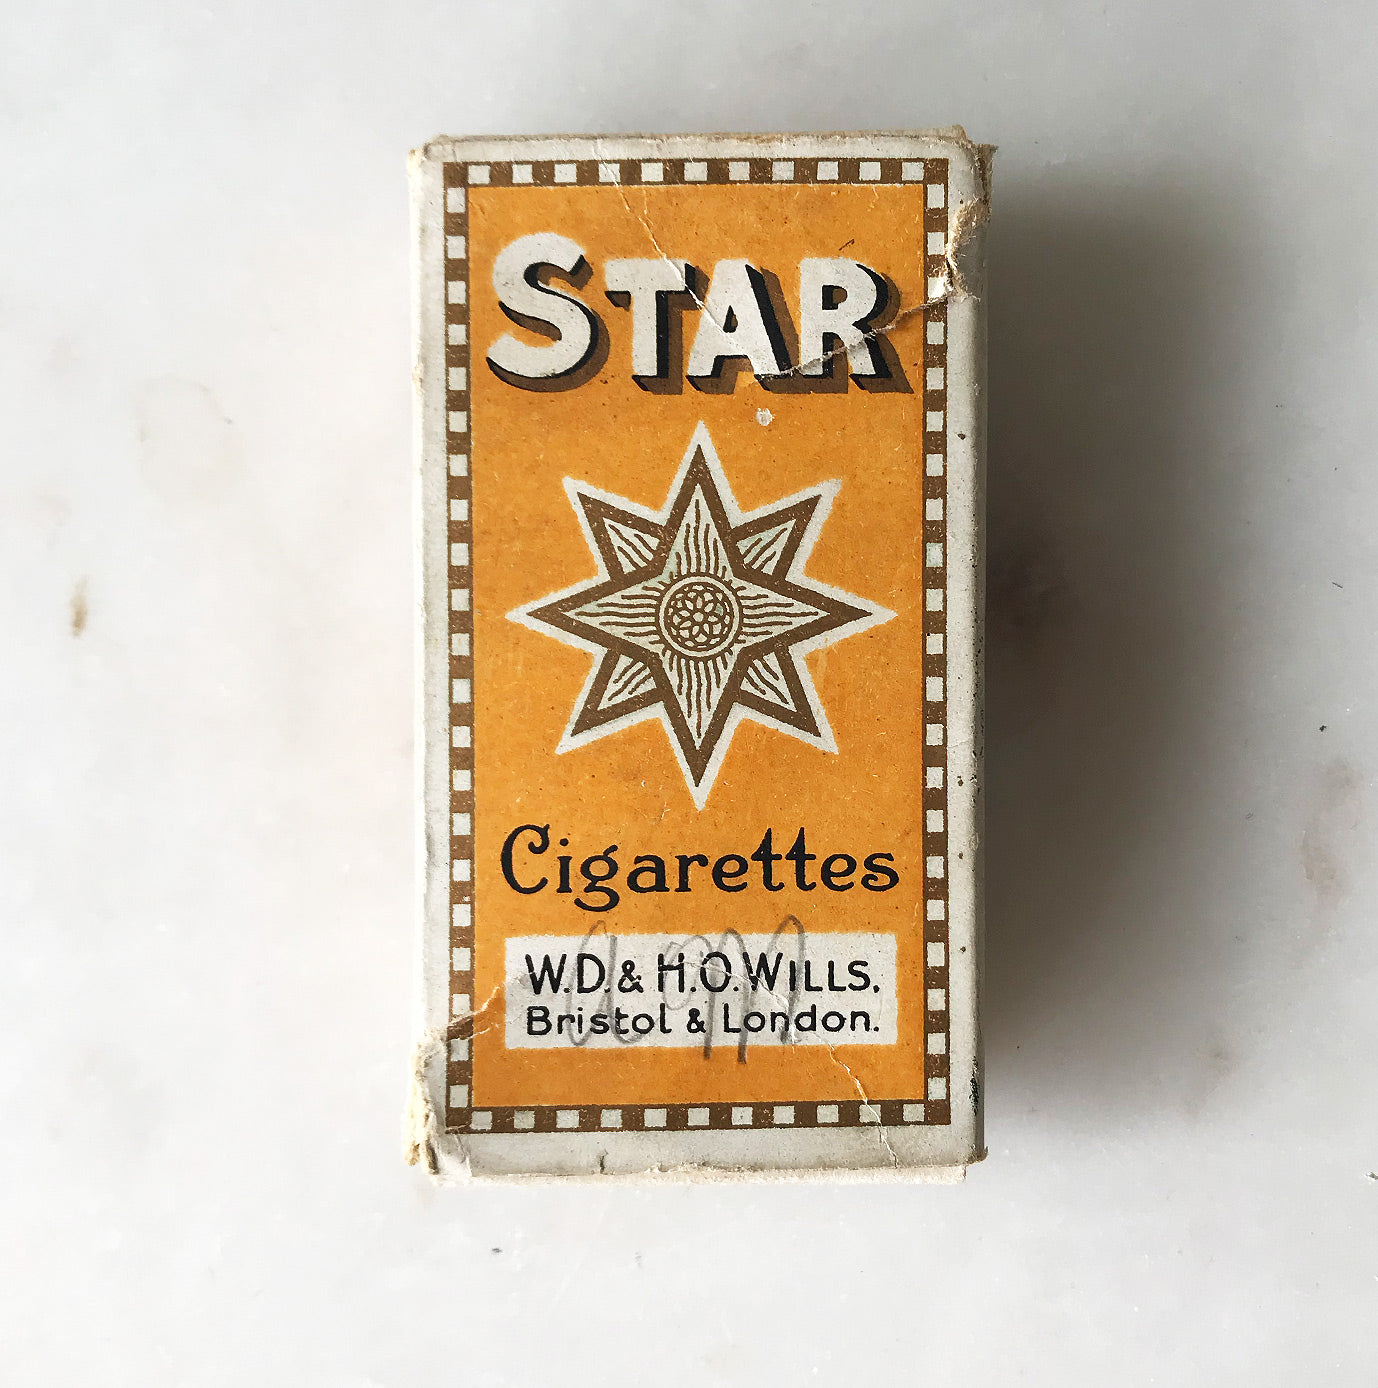 A snap shot of the early 20th century, these vintage cigarette packs are decorated with fantastic typography and imagery - SHOP NOW -  www.intovintage.co.uk